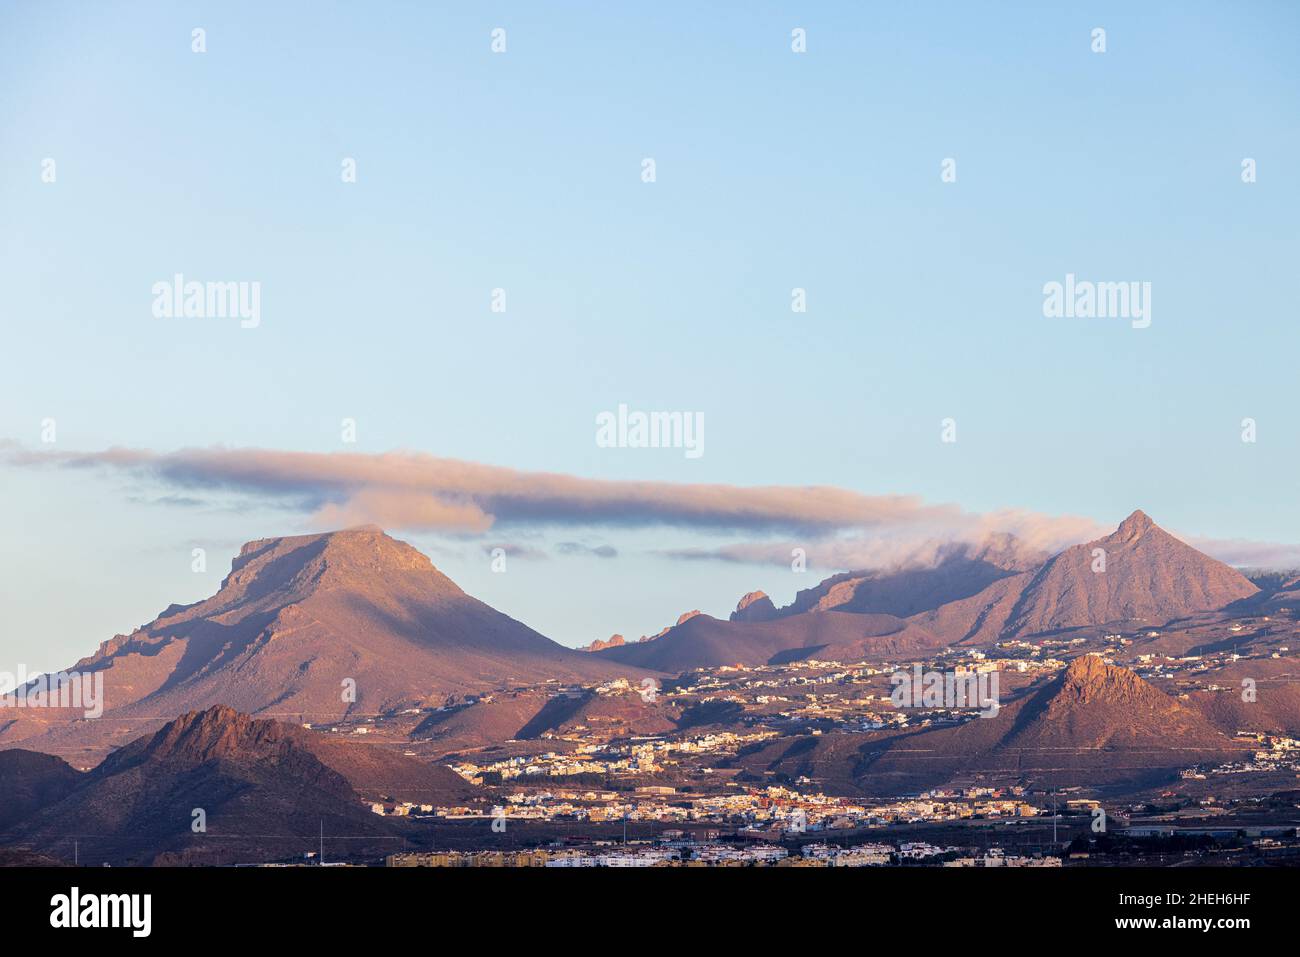 Dawn light on Roque del Conde and Roque Imoque seen from Costa Silencio on Tenerife, Canary Islands, Spain Stock Photo